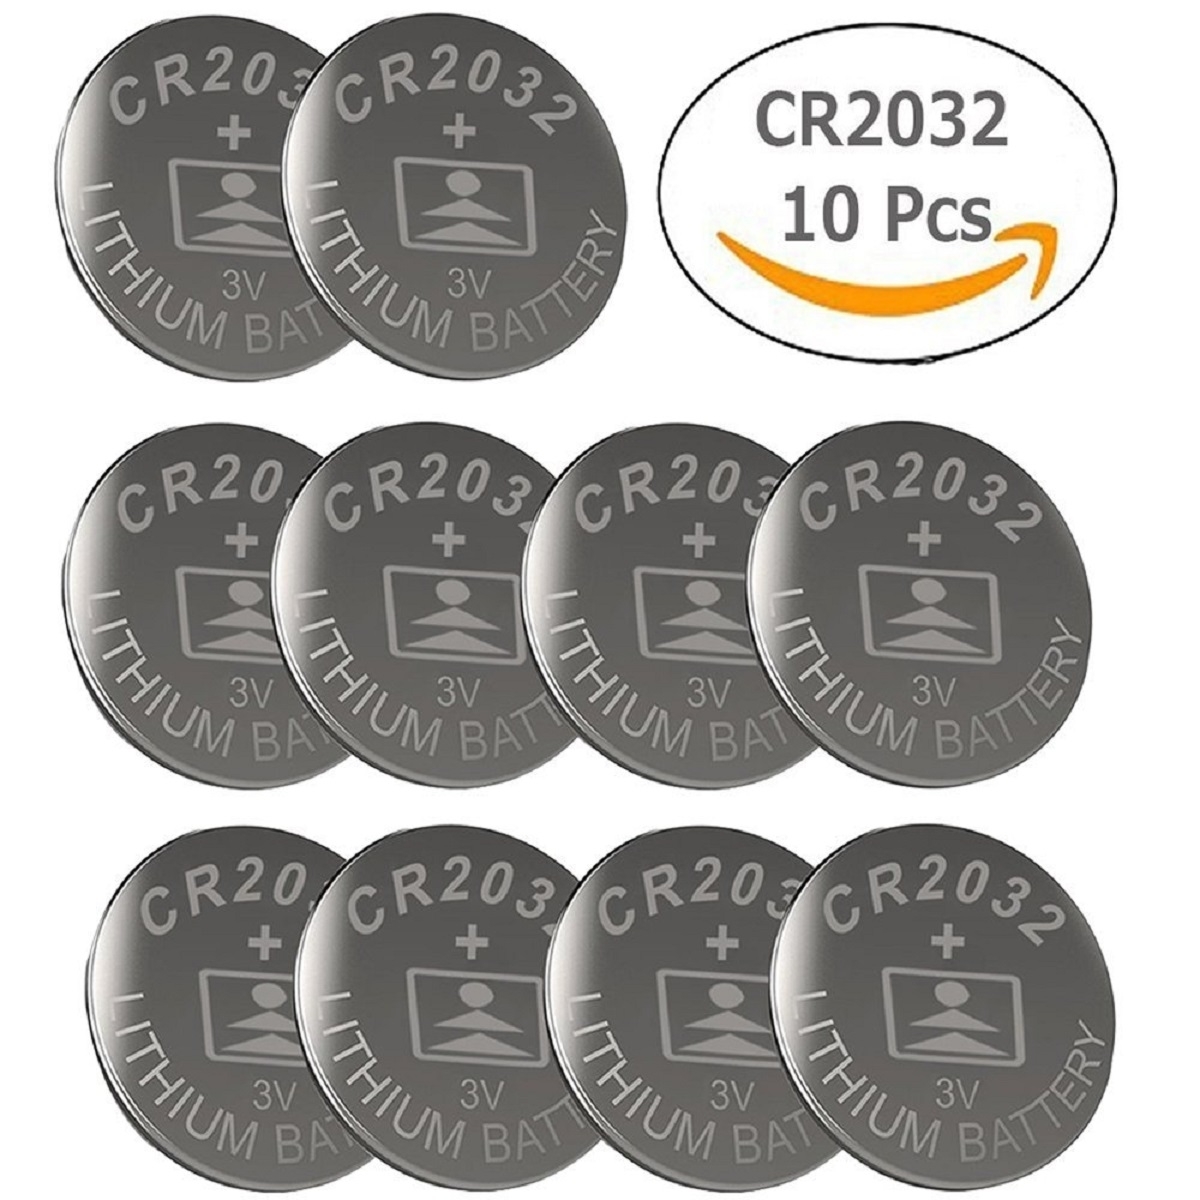 [10-Pack] CR2032 3V Lithium Battery - For Watches, Garage Doors & More